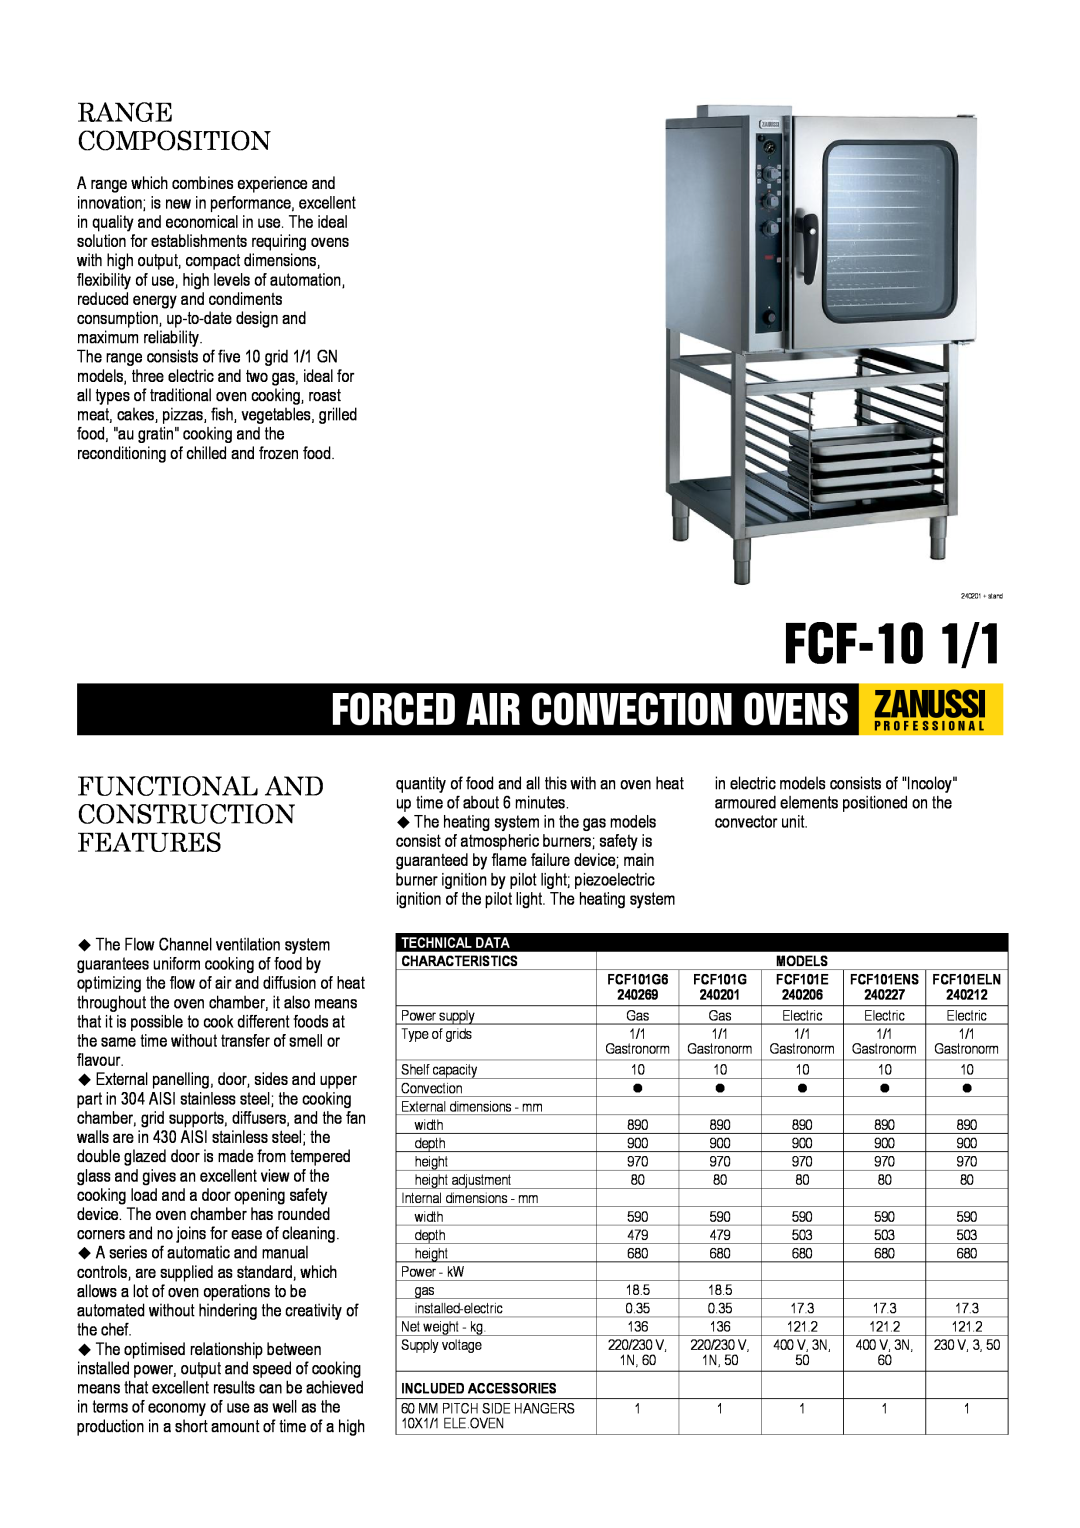 Zanussi 240227, FCF-10 1/1, 240201, 240269 dimensions FCF-101/1, Range Composition, Functional And Construction Features 